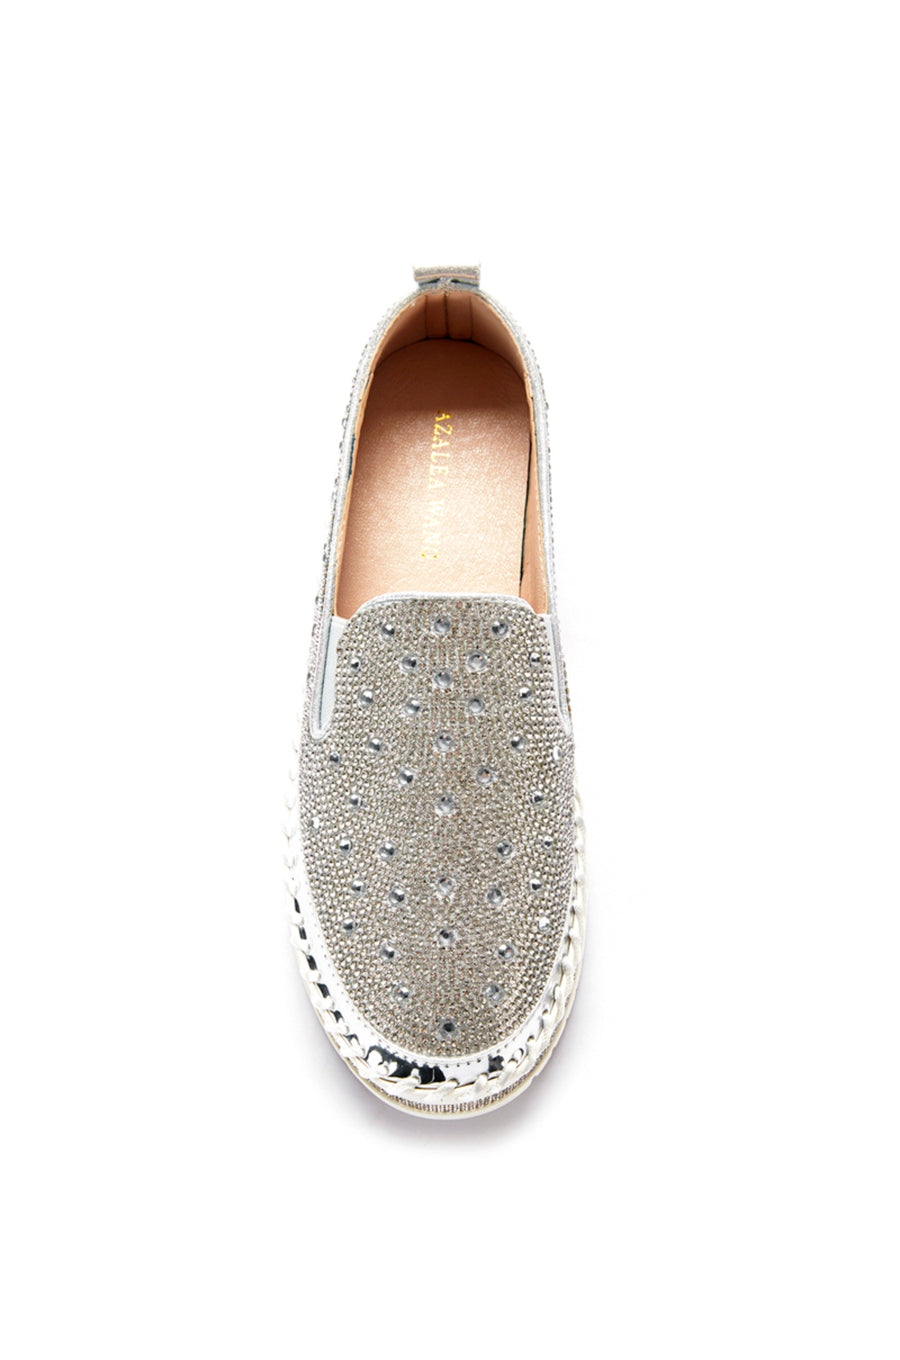 top view of slip on metallic silver flat sneakers with crystal rhinestone embellishments and a white braided platform sole